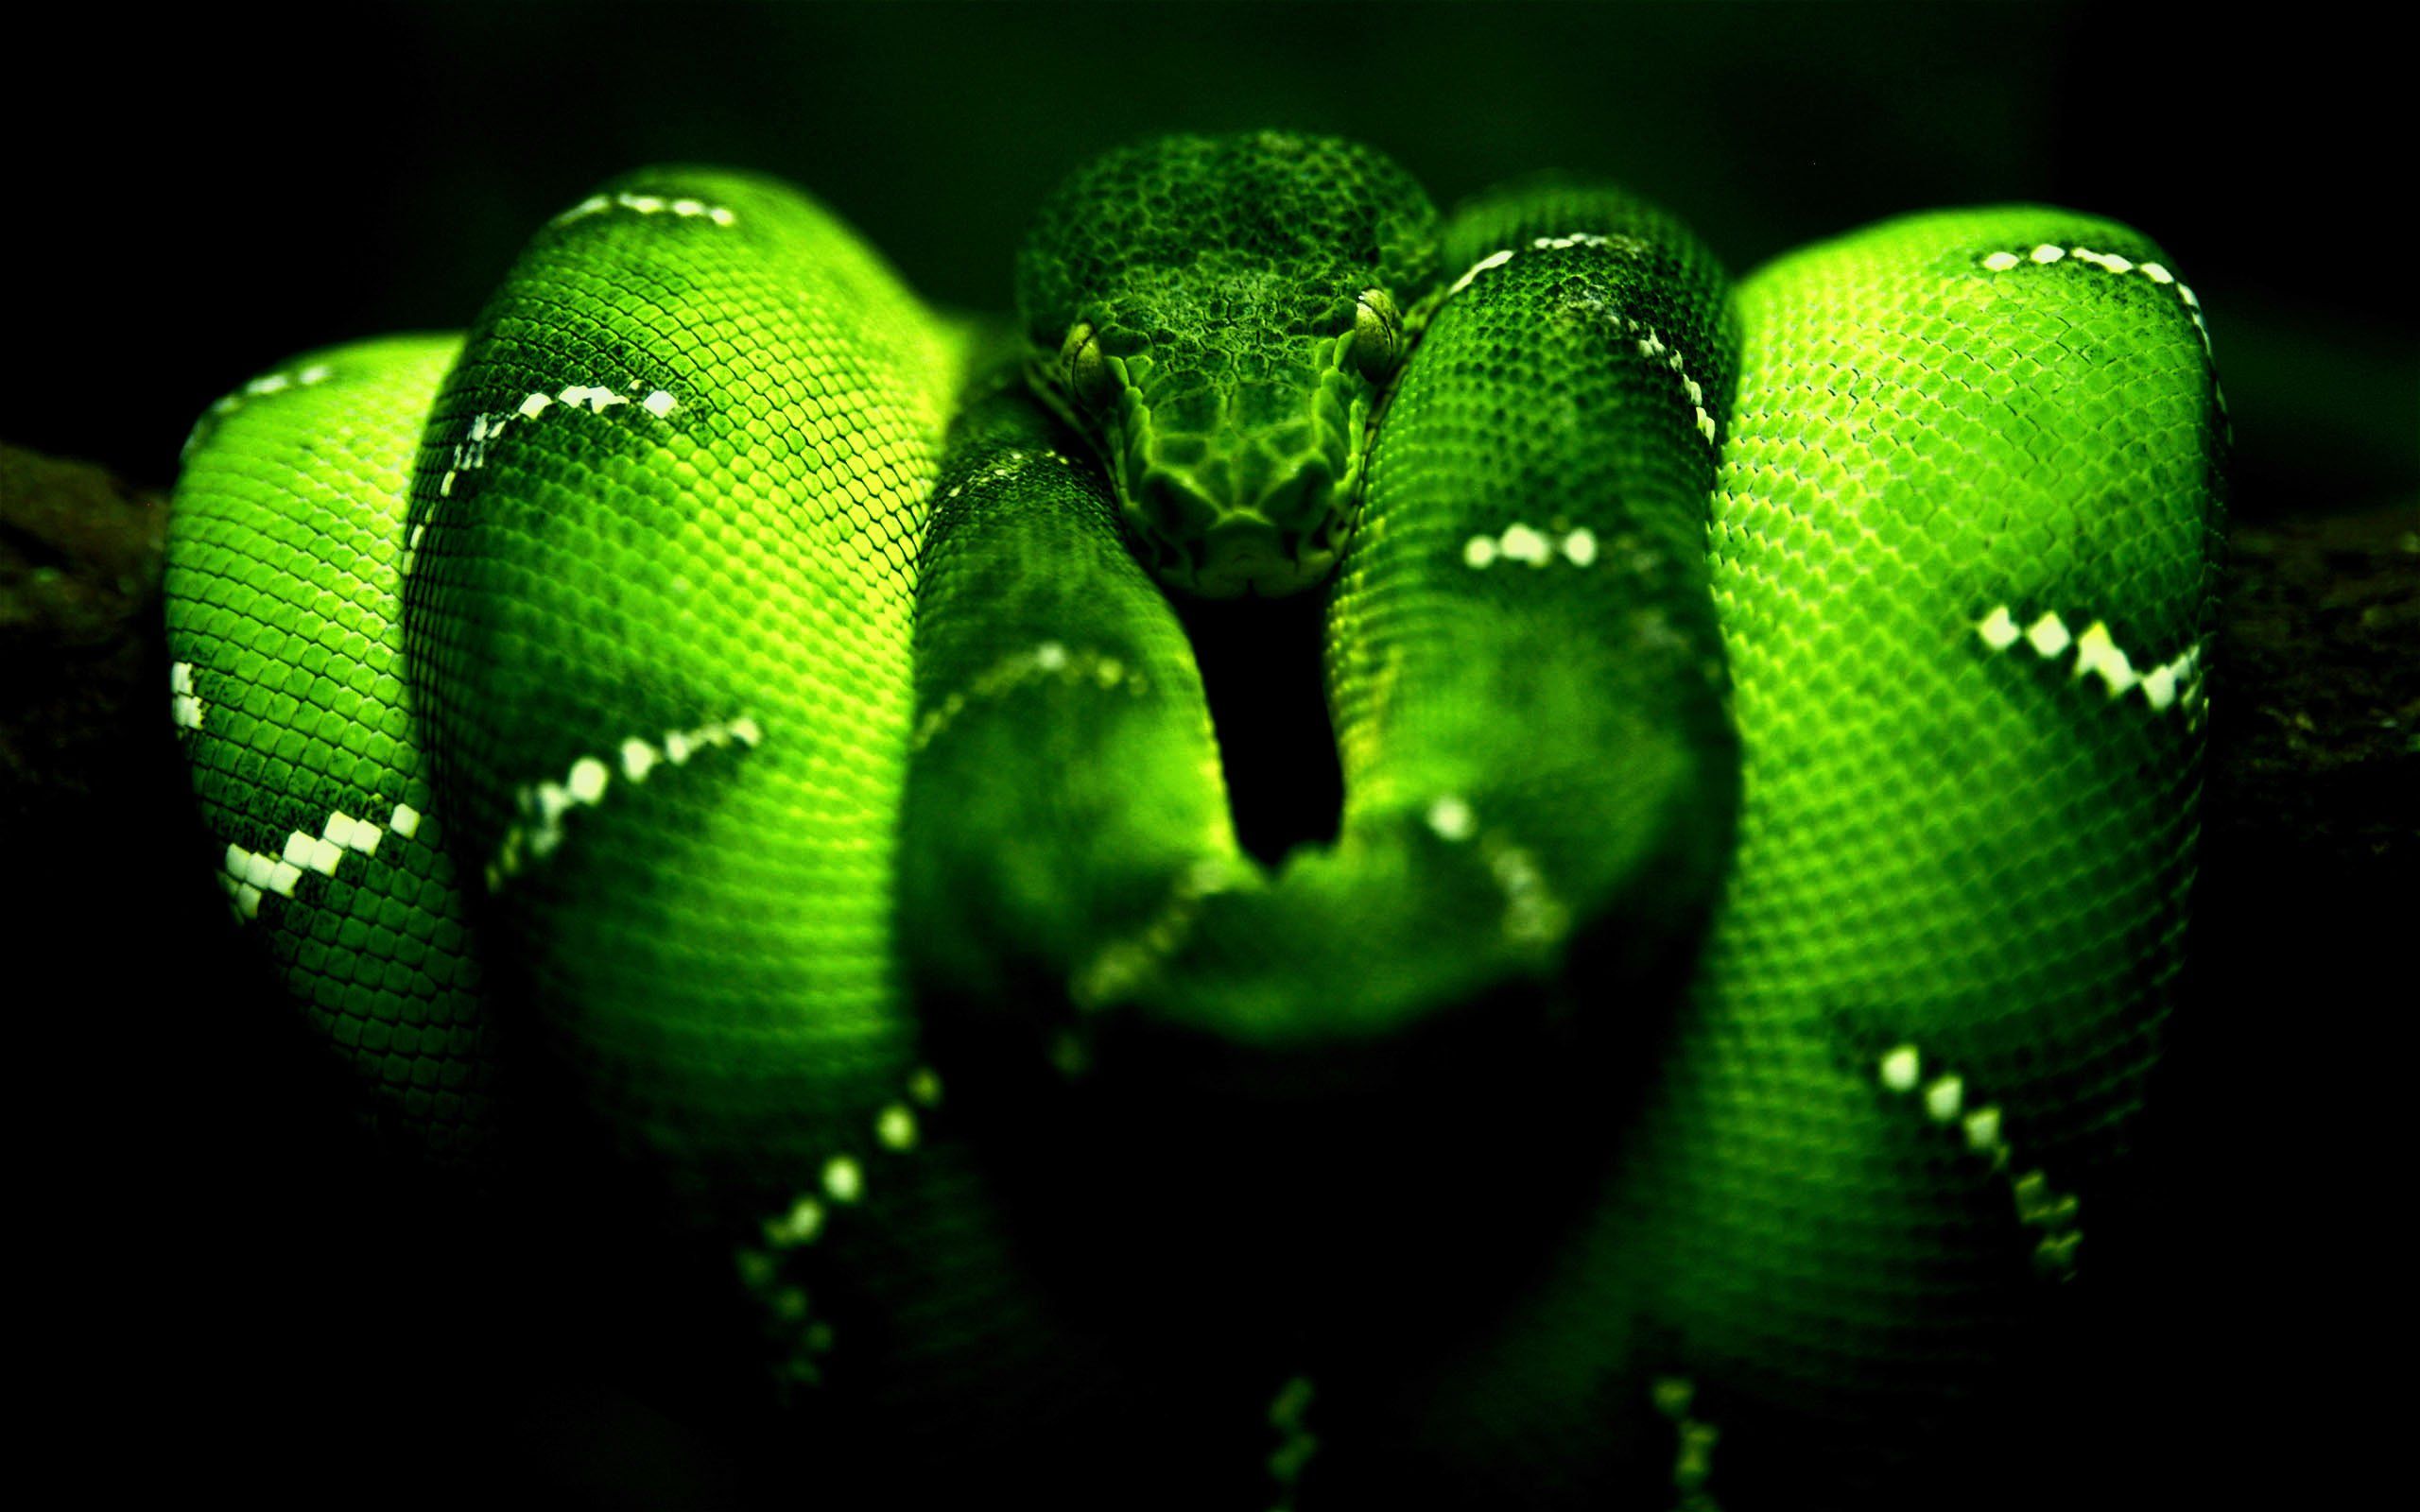 A green snake on the branch of tree - Snake